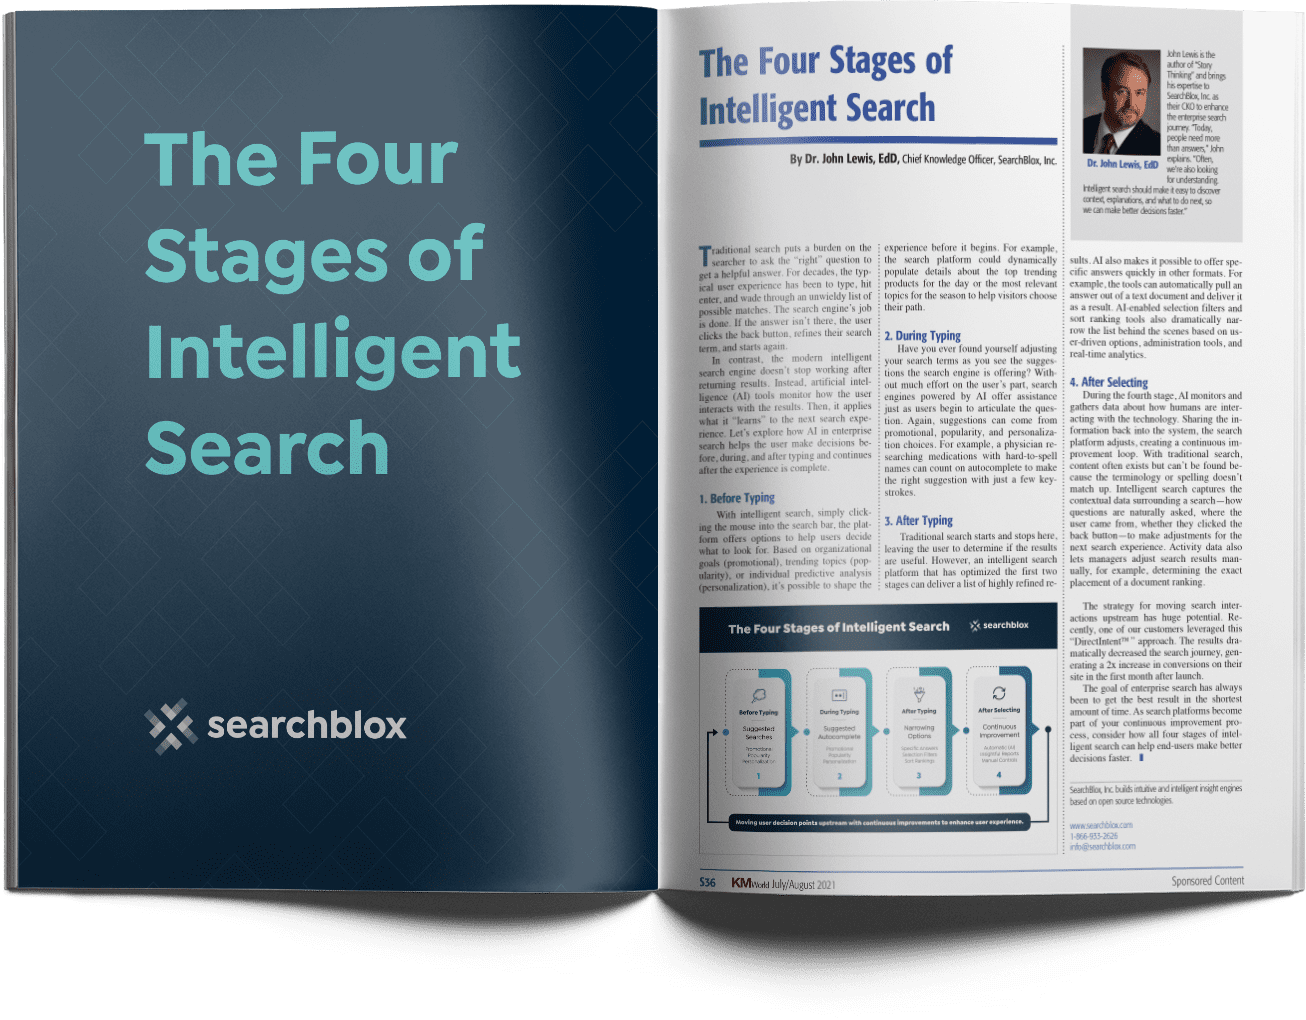 John Lewis describes the four stages of intelligent enterprise search